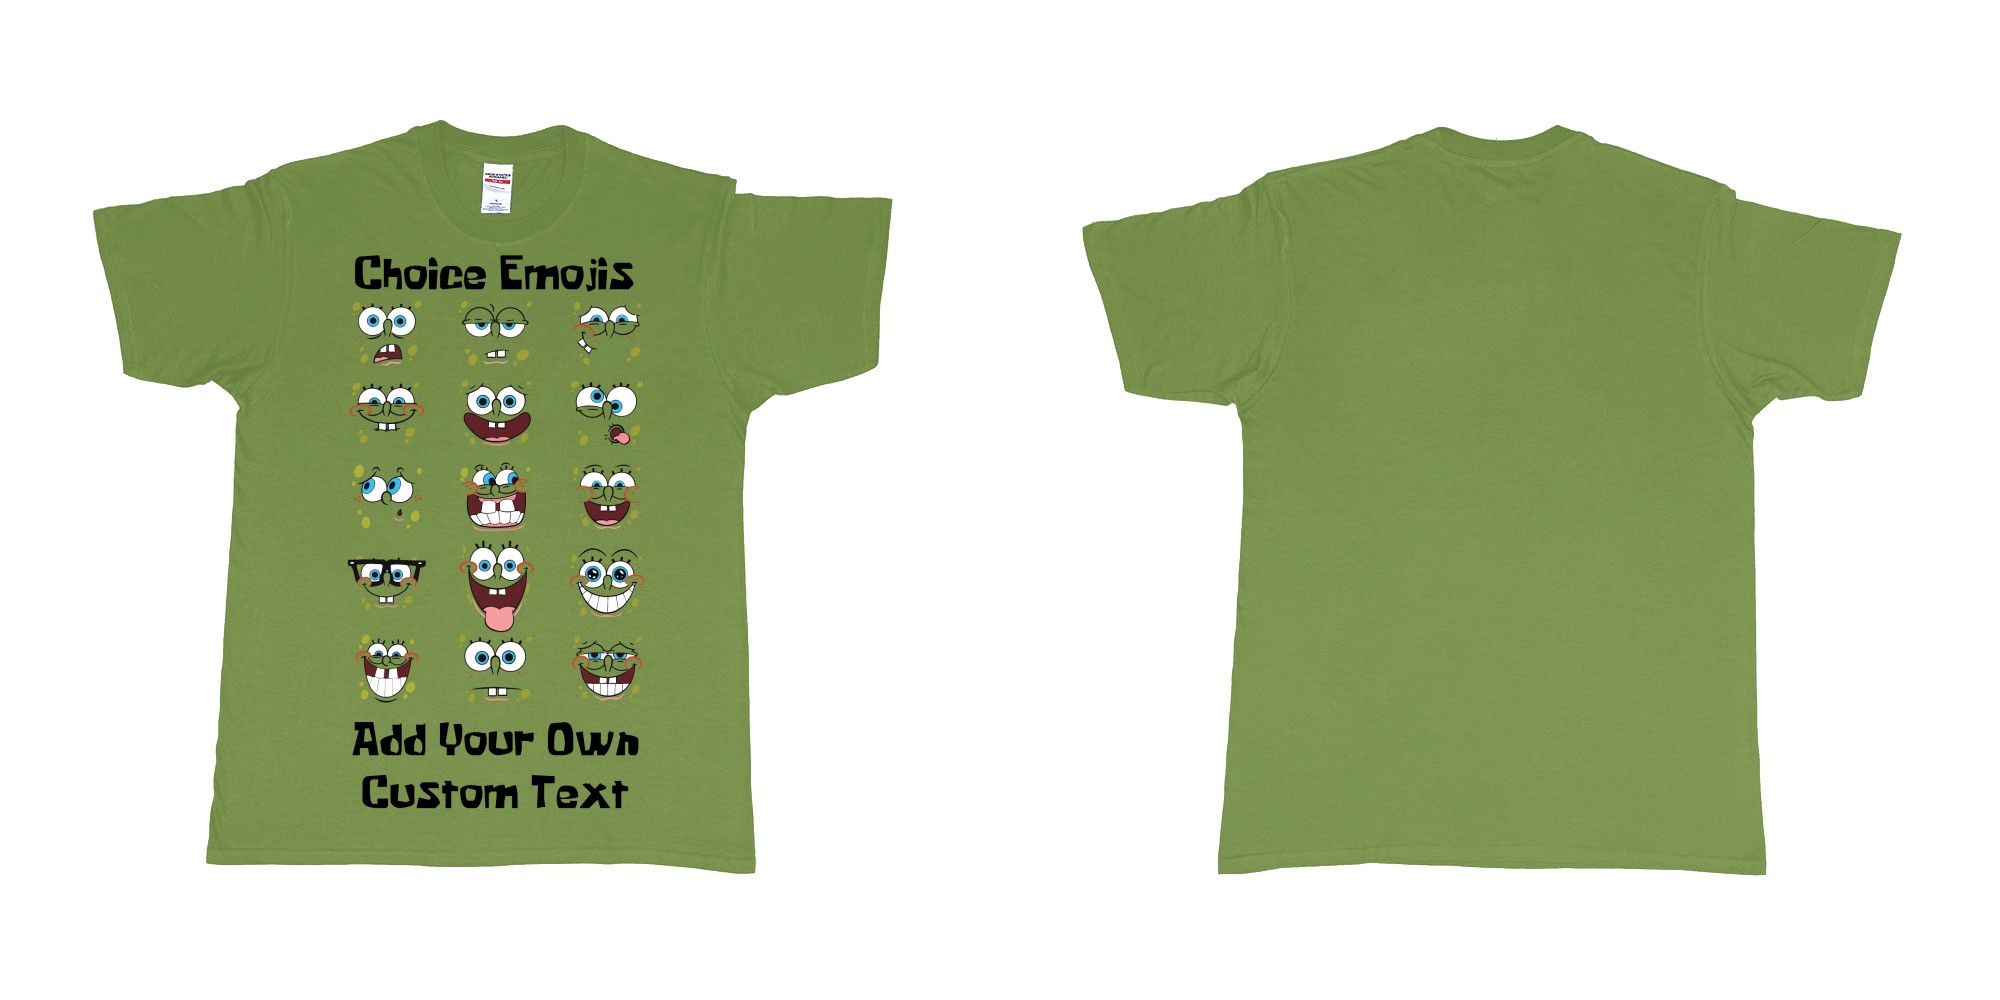 Custom tshirt design spongebob squarepants many faces emojis custum printing in fabric color military-green choice your own text made in Bali by The Pirate Way